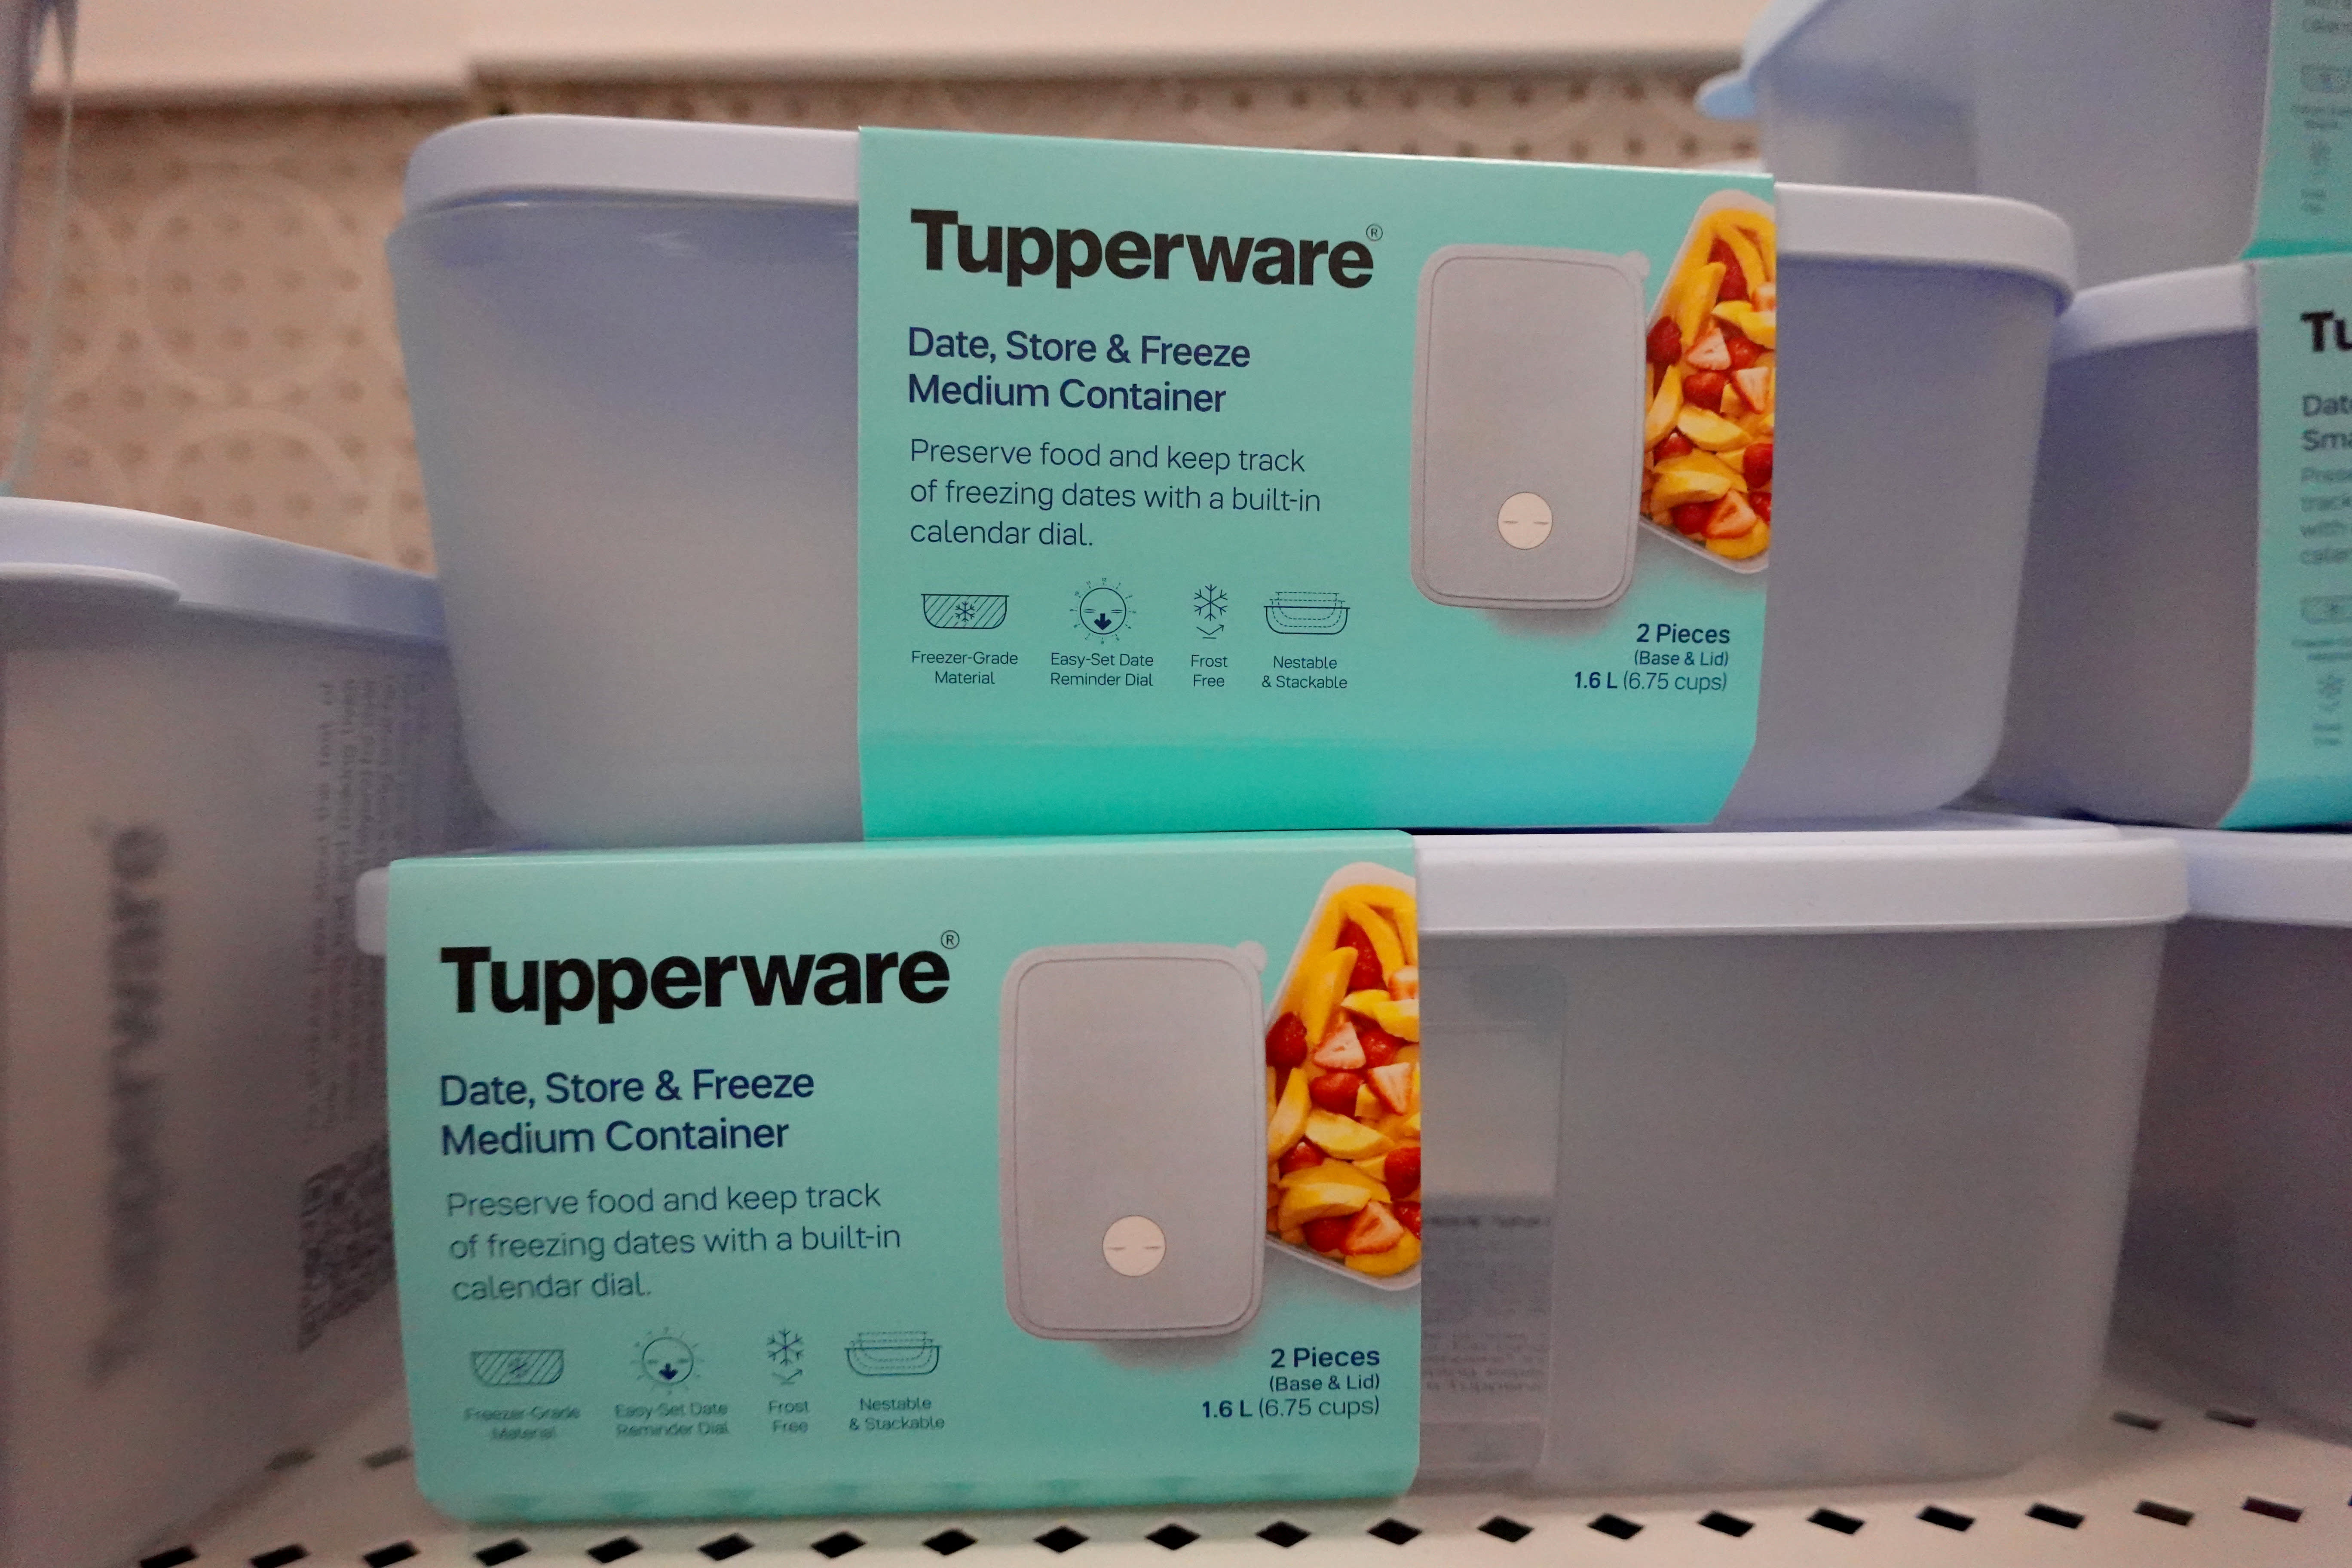 Are tupperware products worth their extra price? In terms of